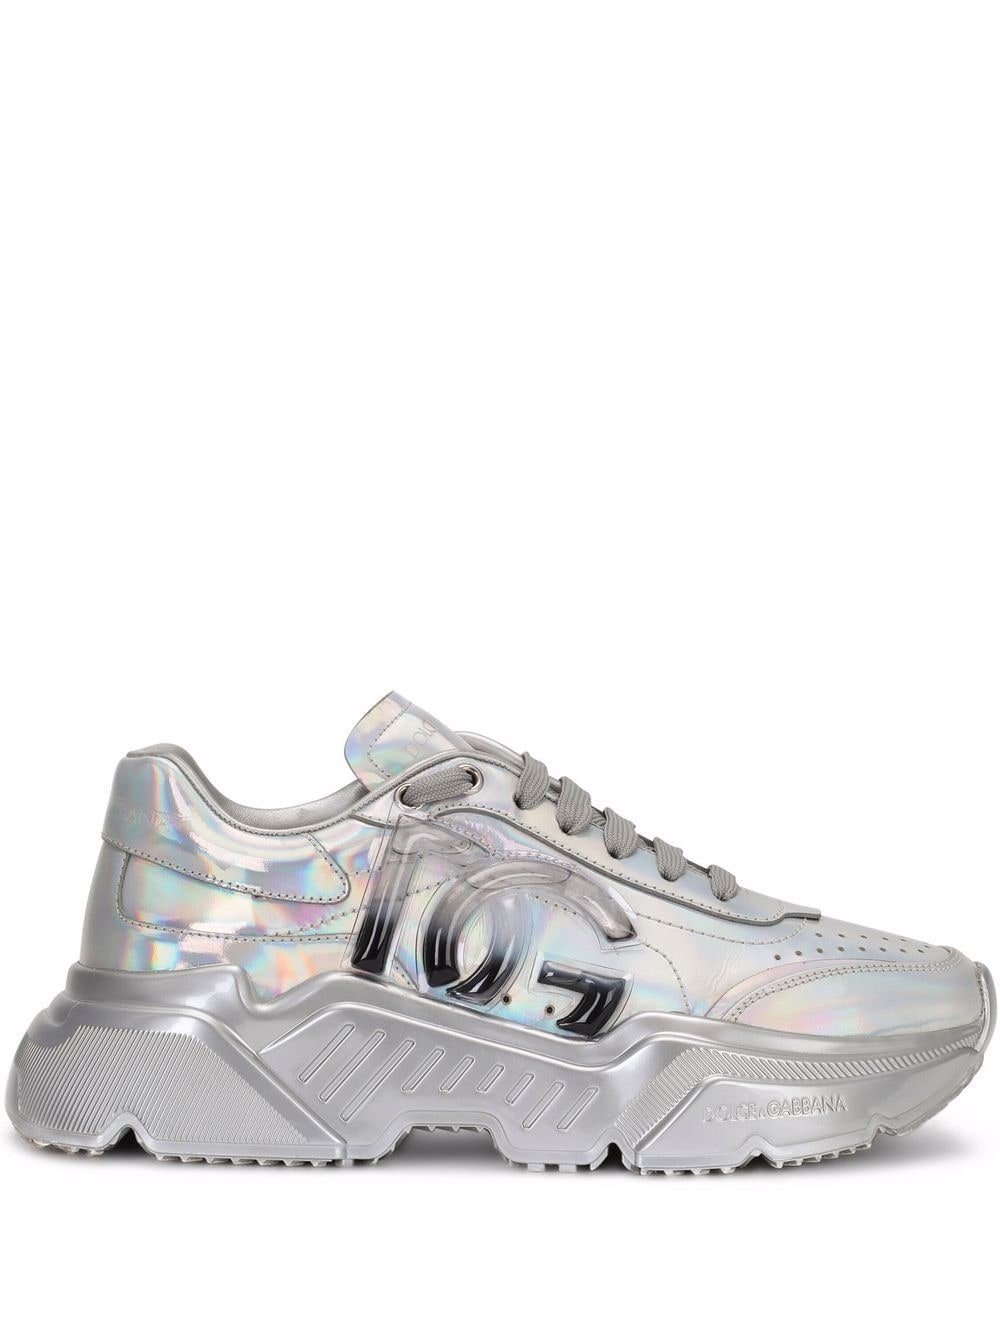 holographic-effect lace-up sneakers Profile Picture